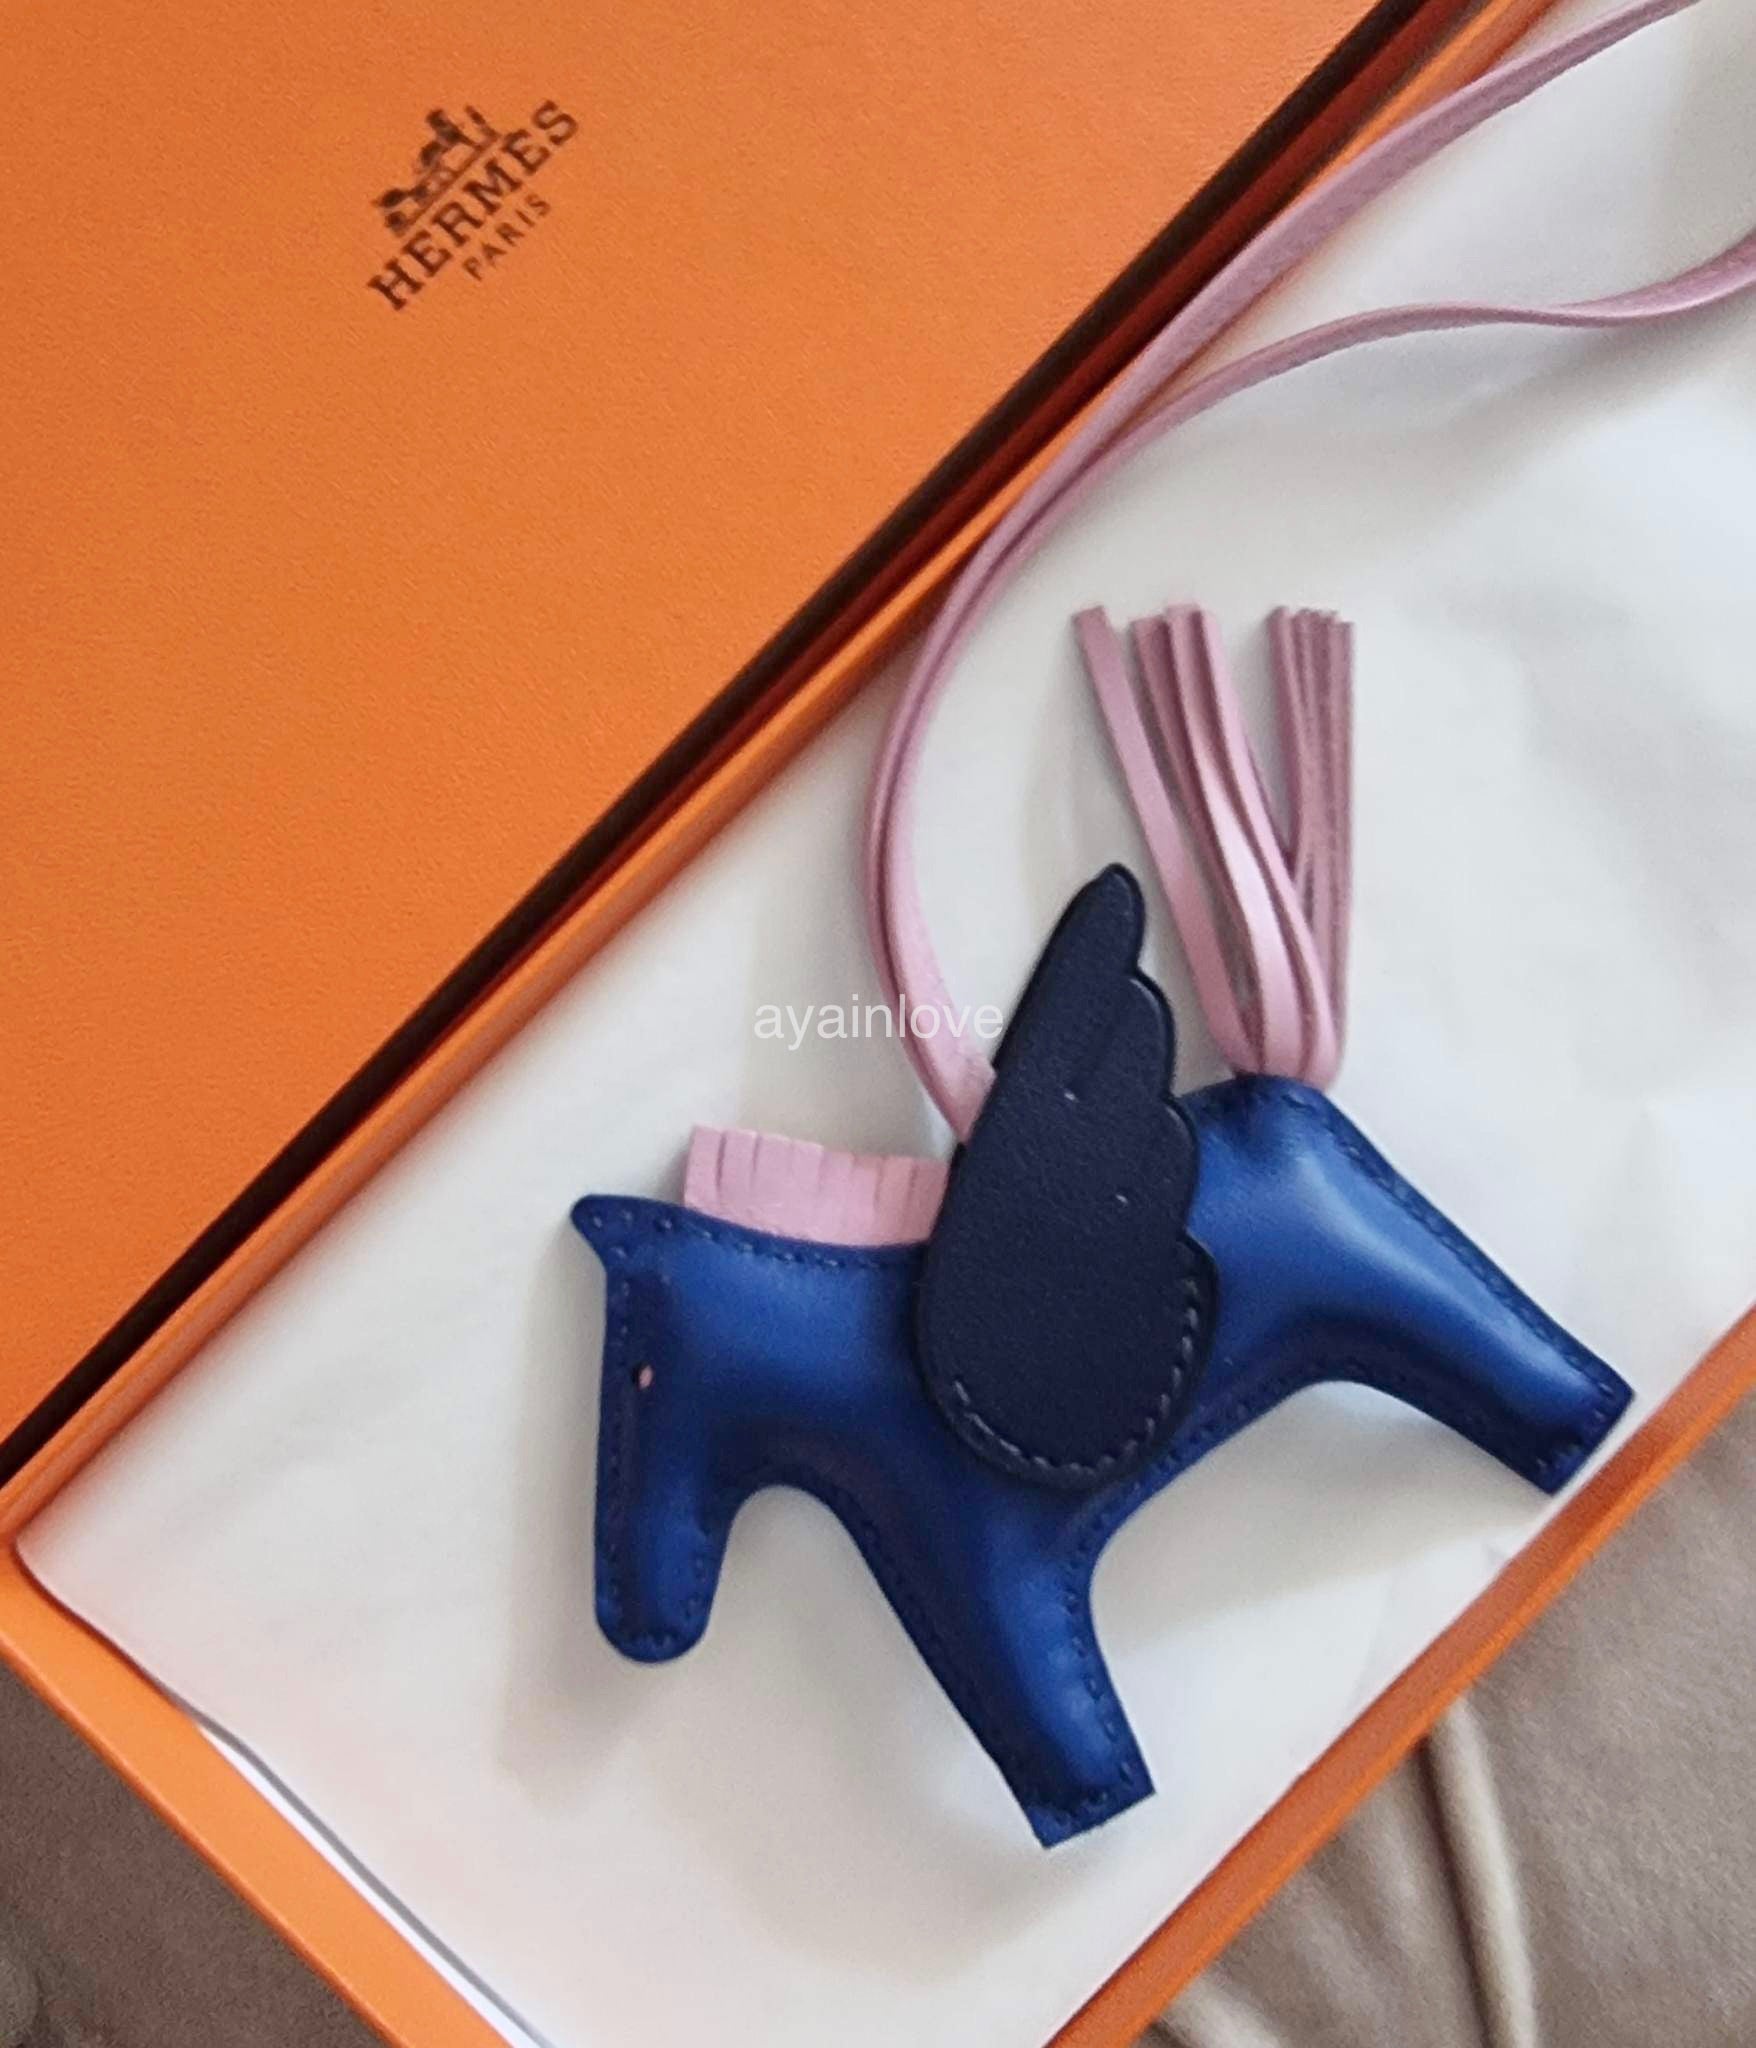 Shortest same day shipping [New unused] Made in 2022 Hermes Pegasus Rodeo  Charm PM Chai Mauve Silvestre Mint Anyo Milo Lambskin Grigri HERMES MILO